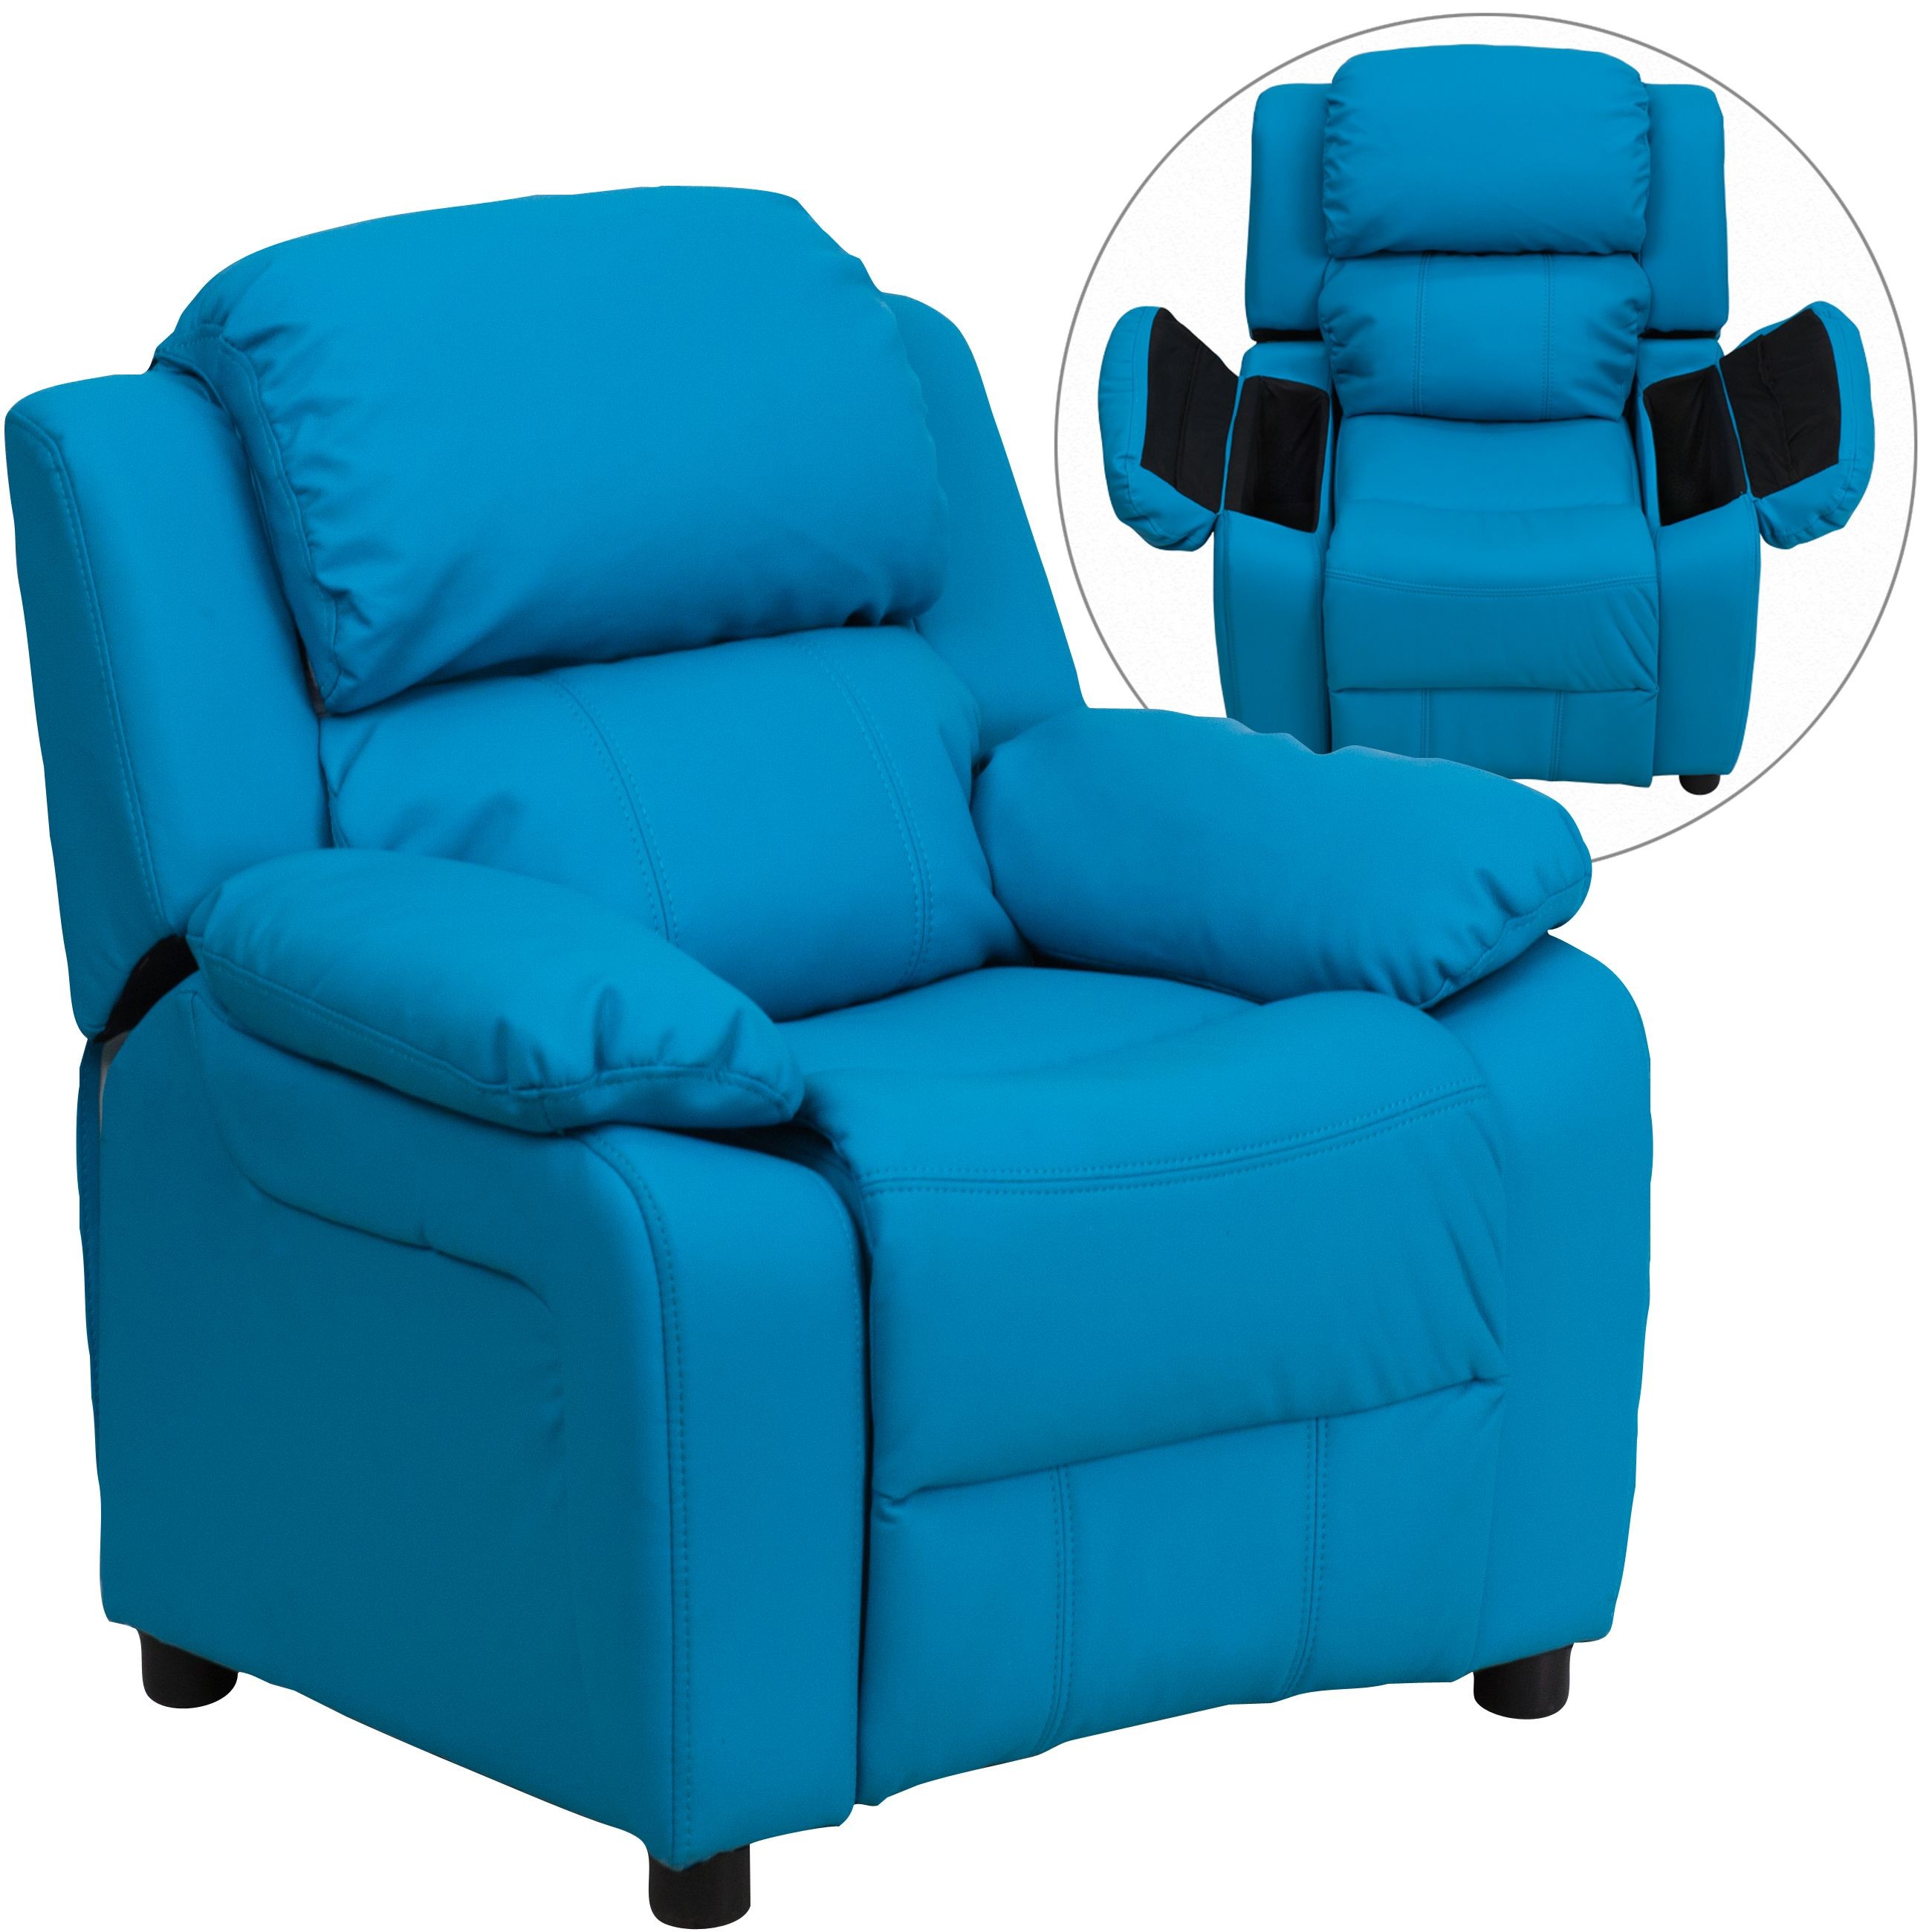 Deluxe Heavily Padded Contemporary Turquoise Vinyl Kids Recliner With Storage Arms 4960 Xlarge 